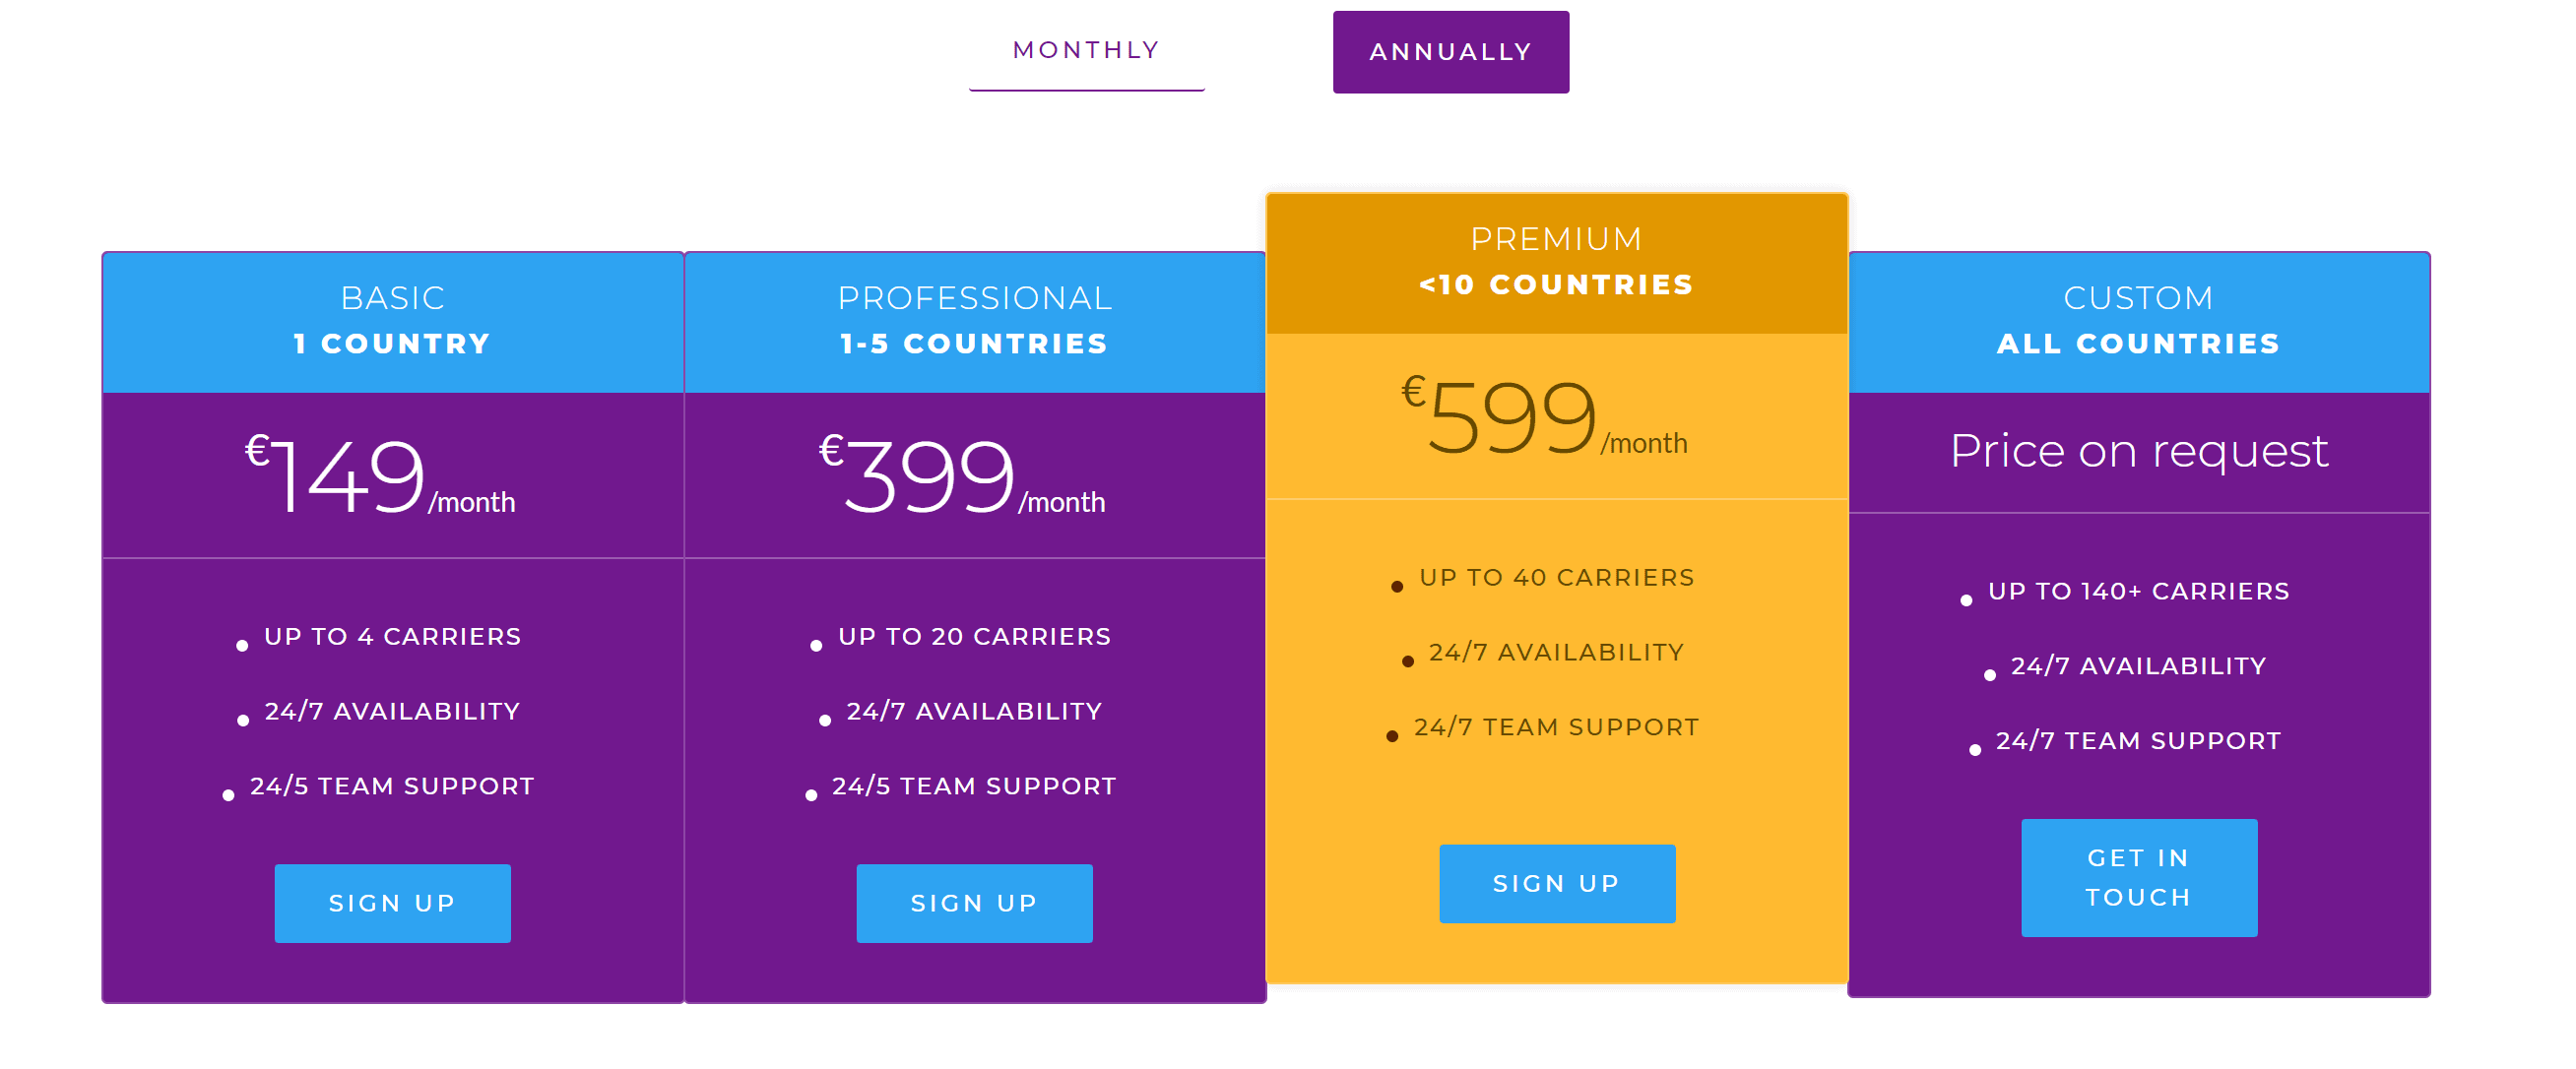 3G Proxy Coupons - Get discount on pricing